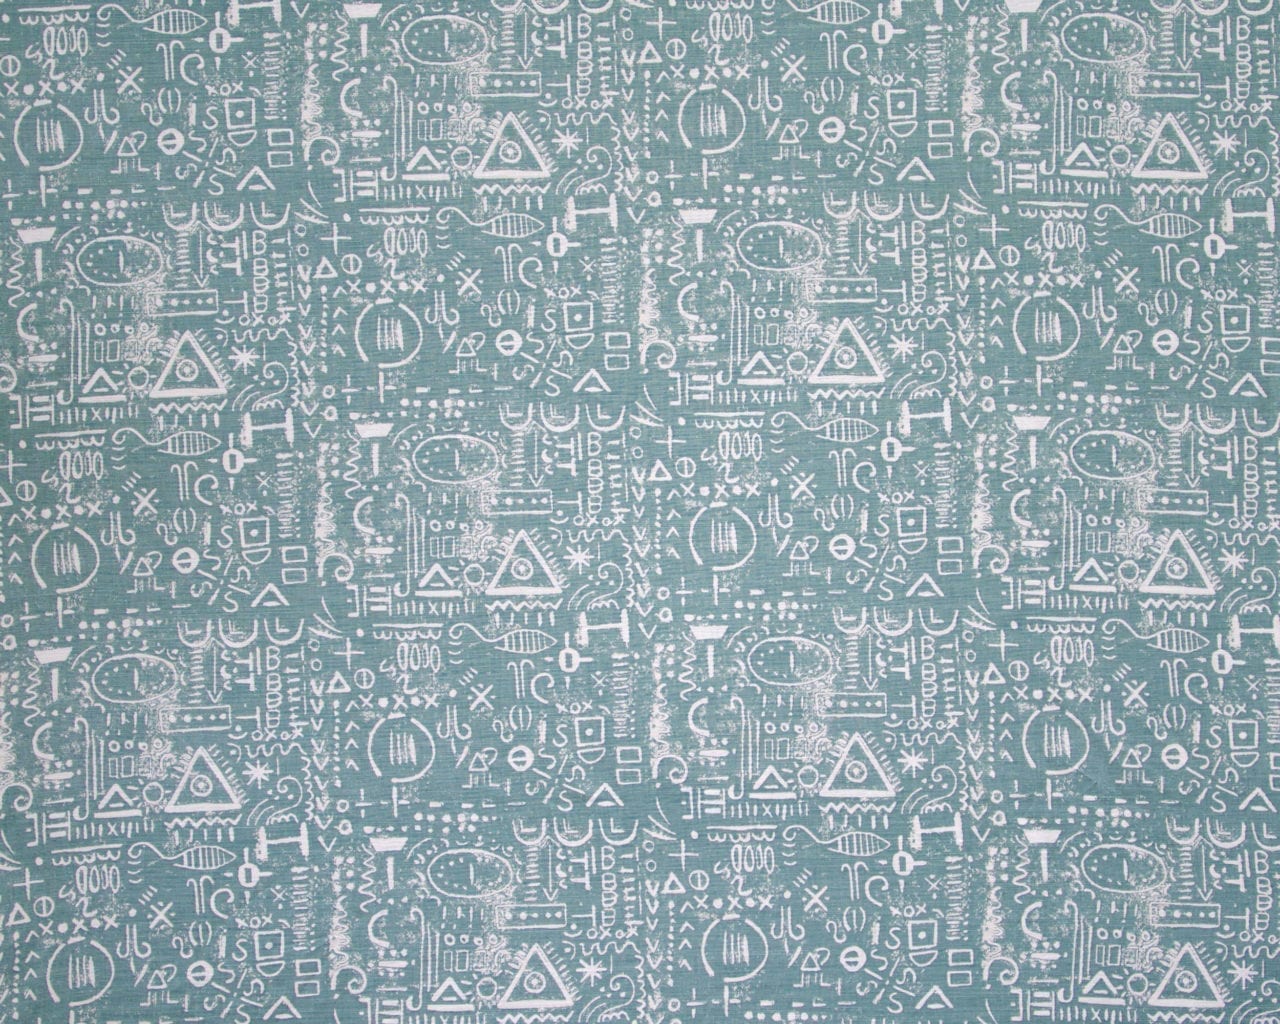 Tacit in Duck Egg Blue fabric by Annie Sloan